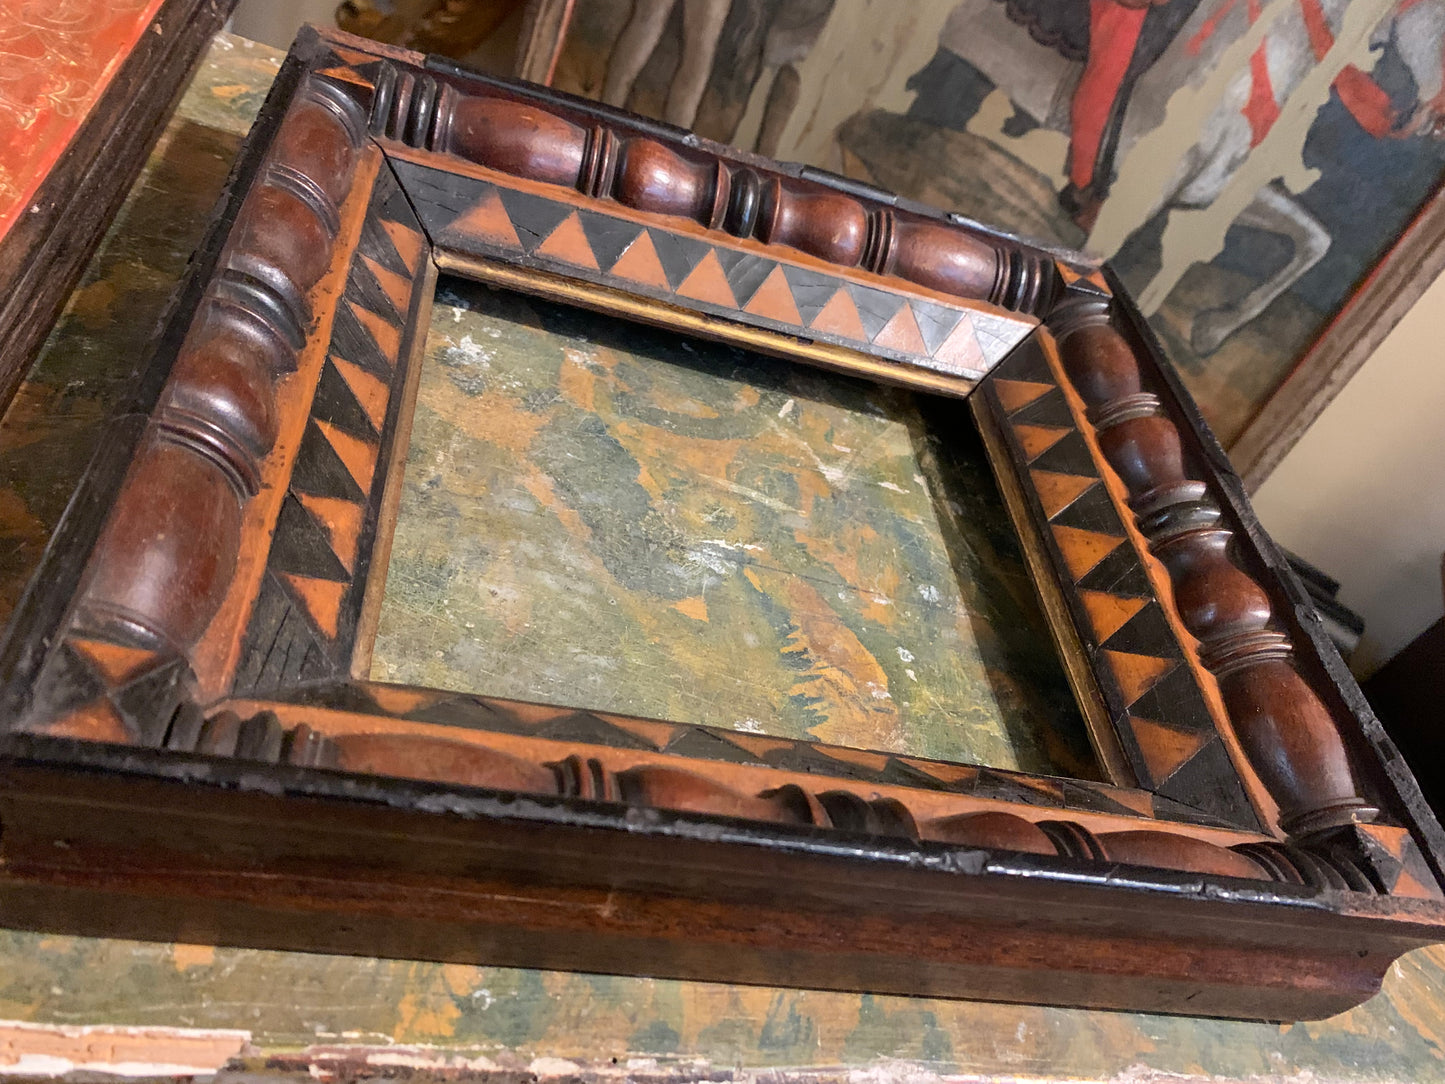 Unusual frame in various woods with geometric decorations.  Early 19 century